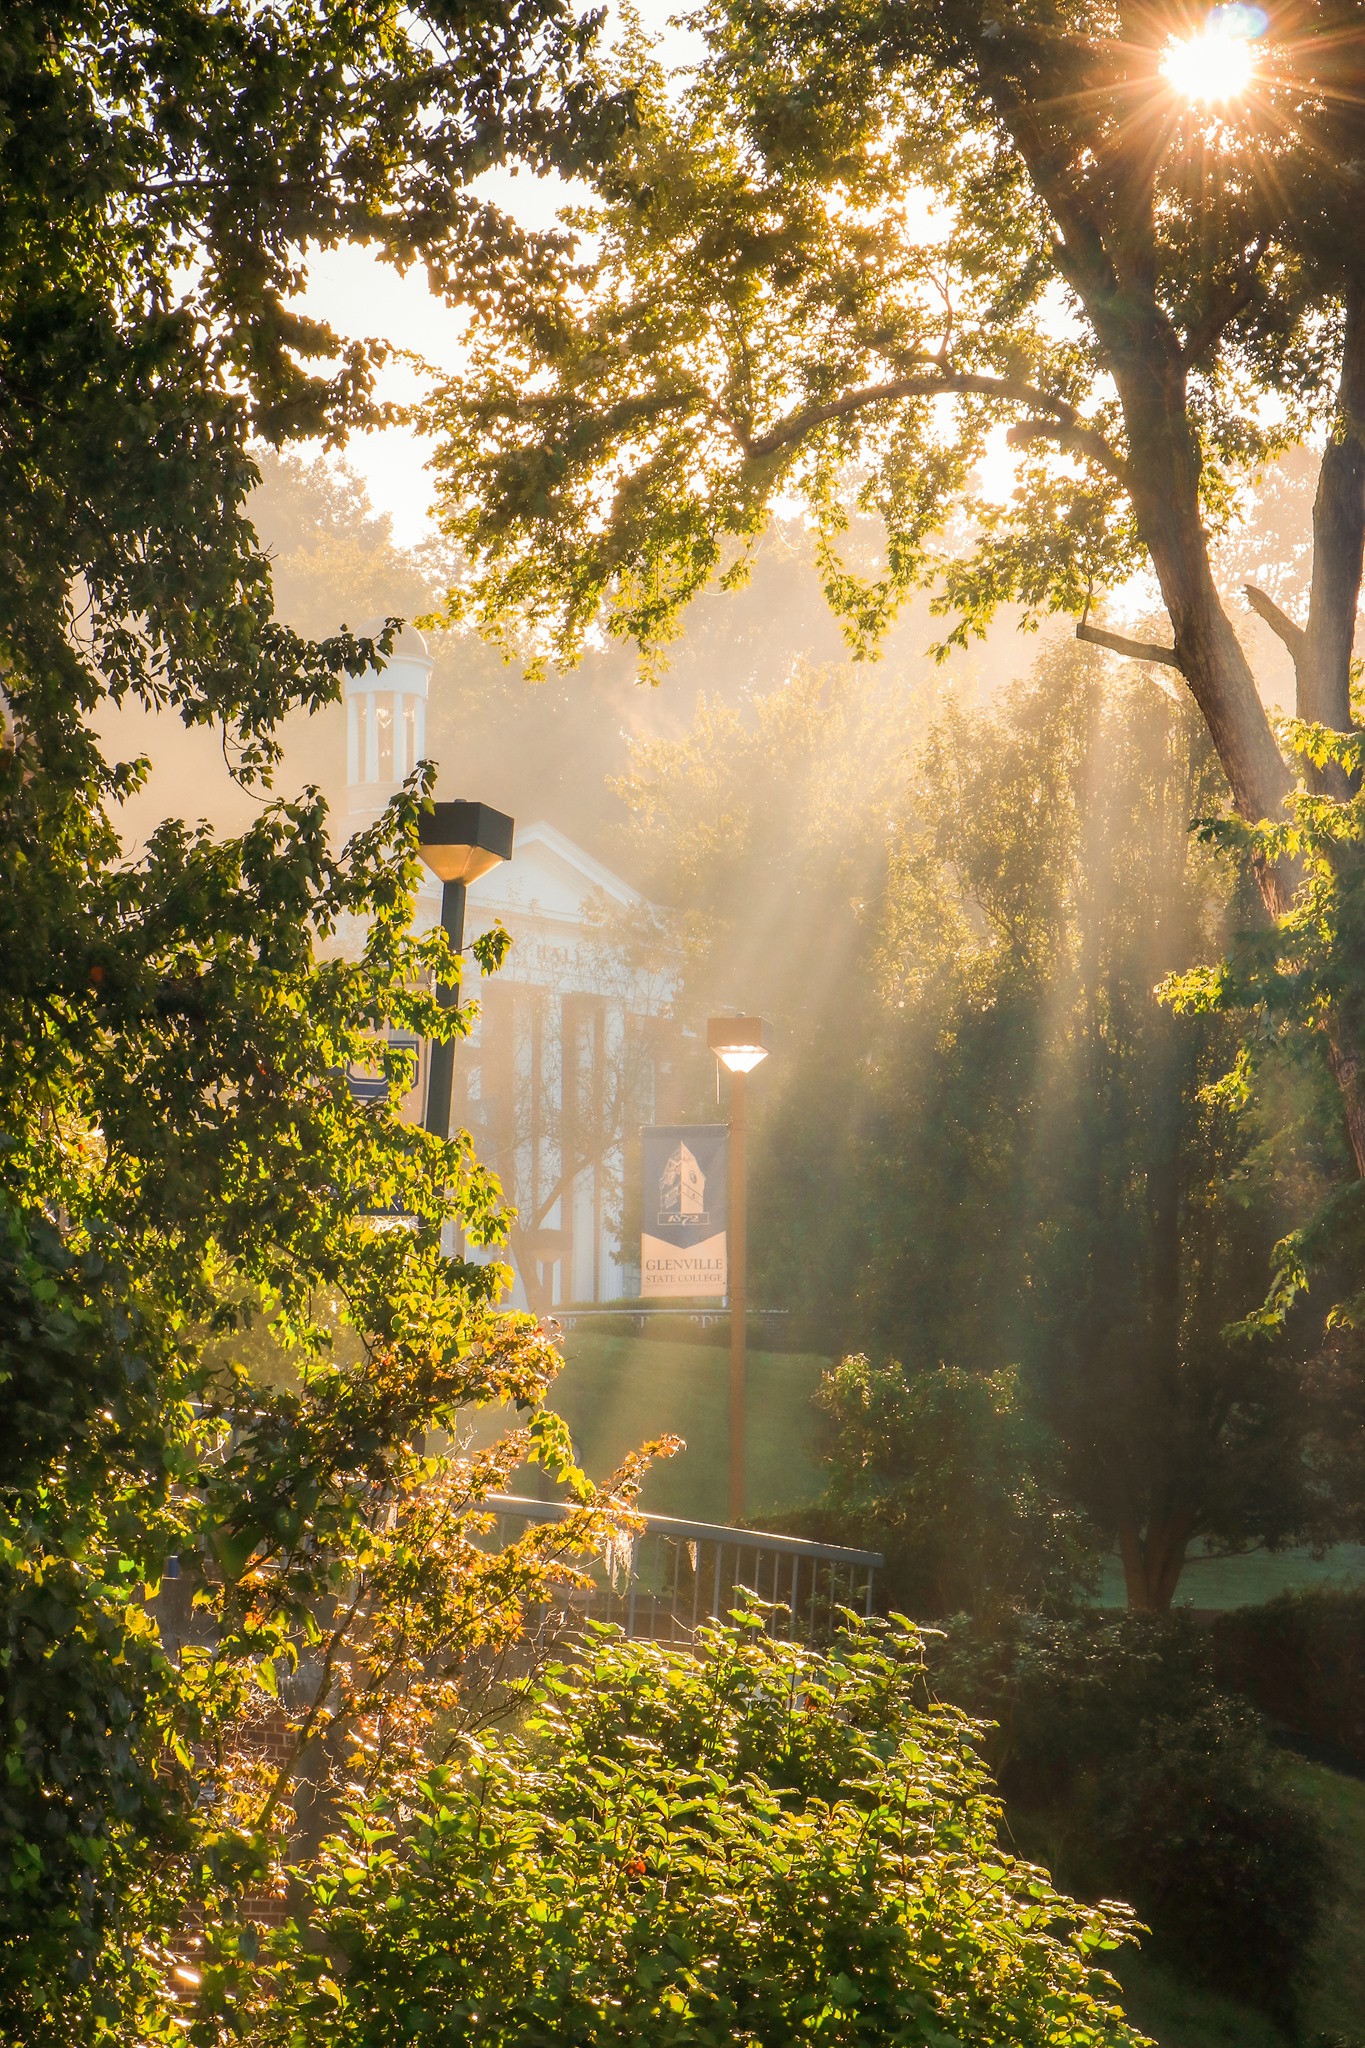 Clark Hall stands in the distance, bathed in soft early morning sunlight. Lush green and golden trees frame the shot.